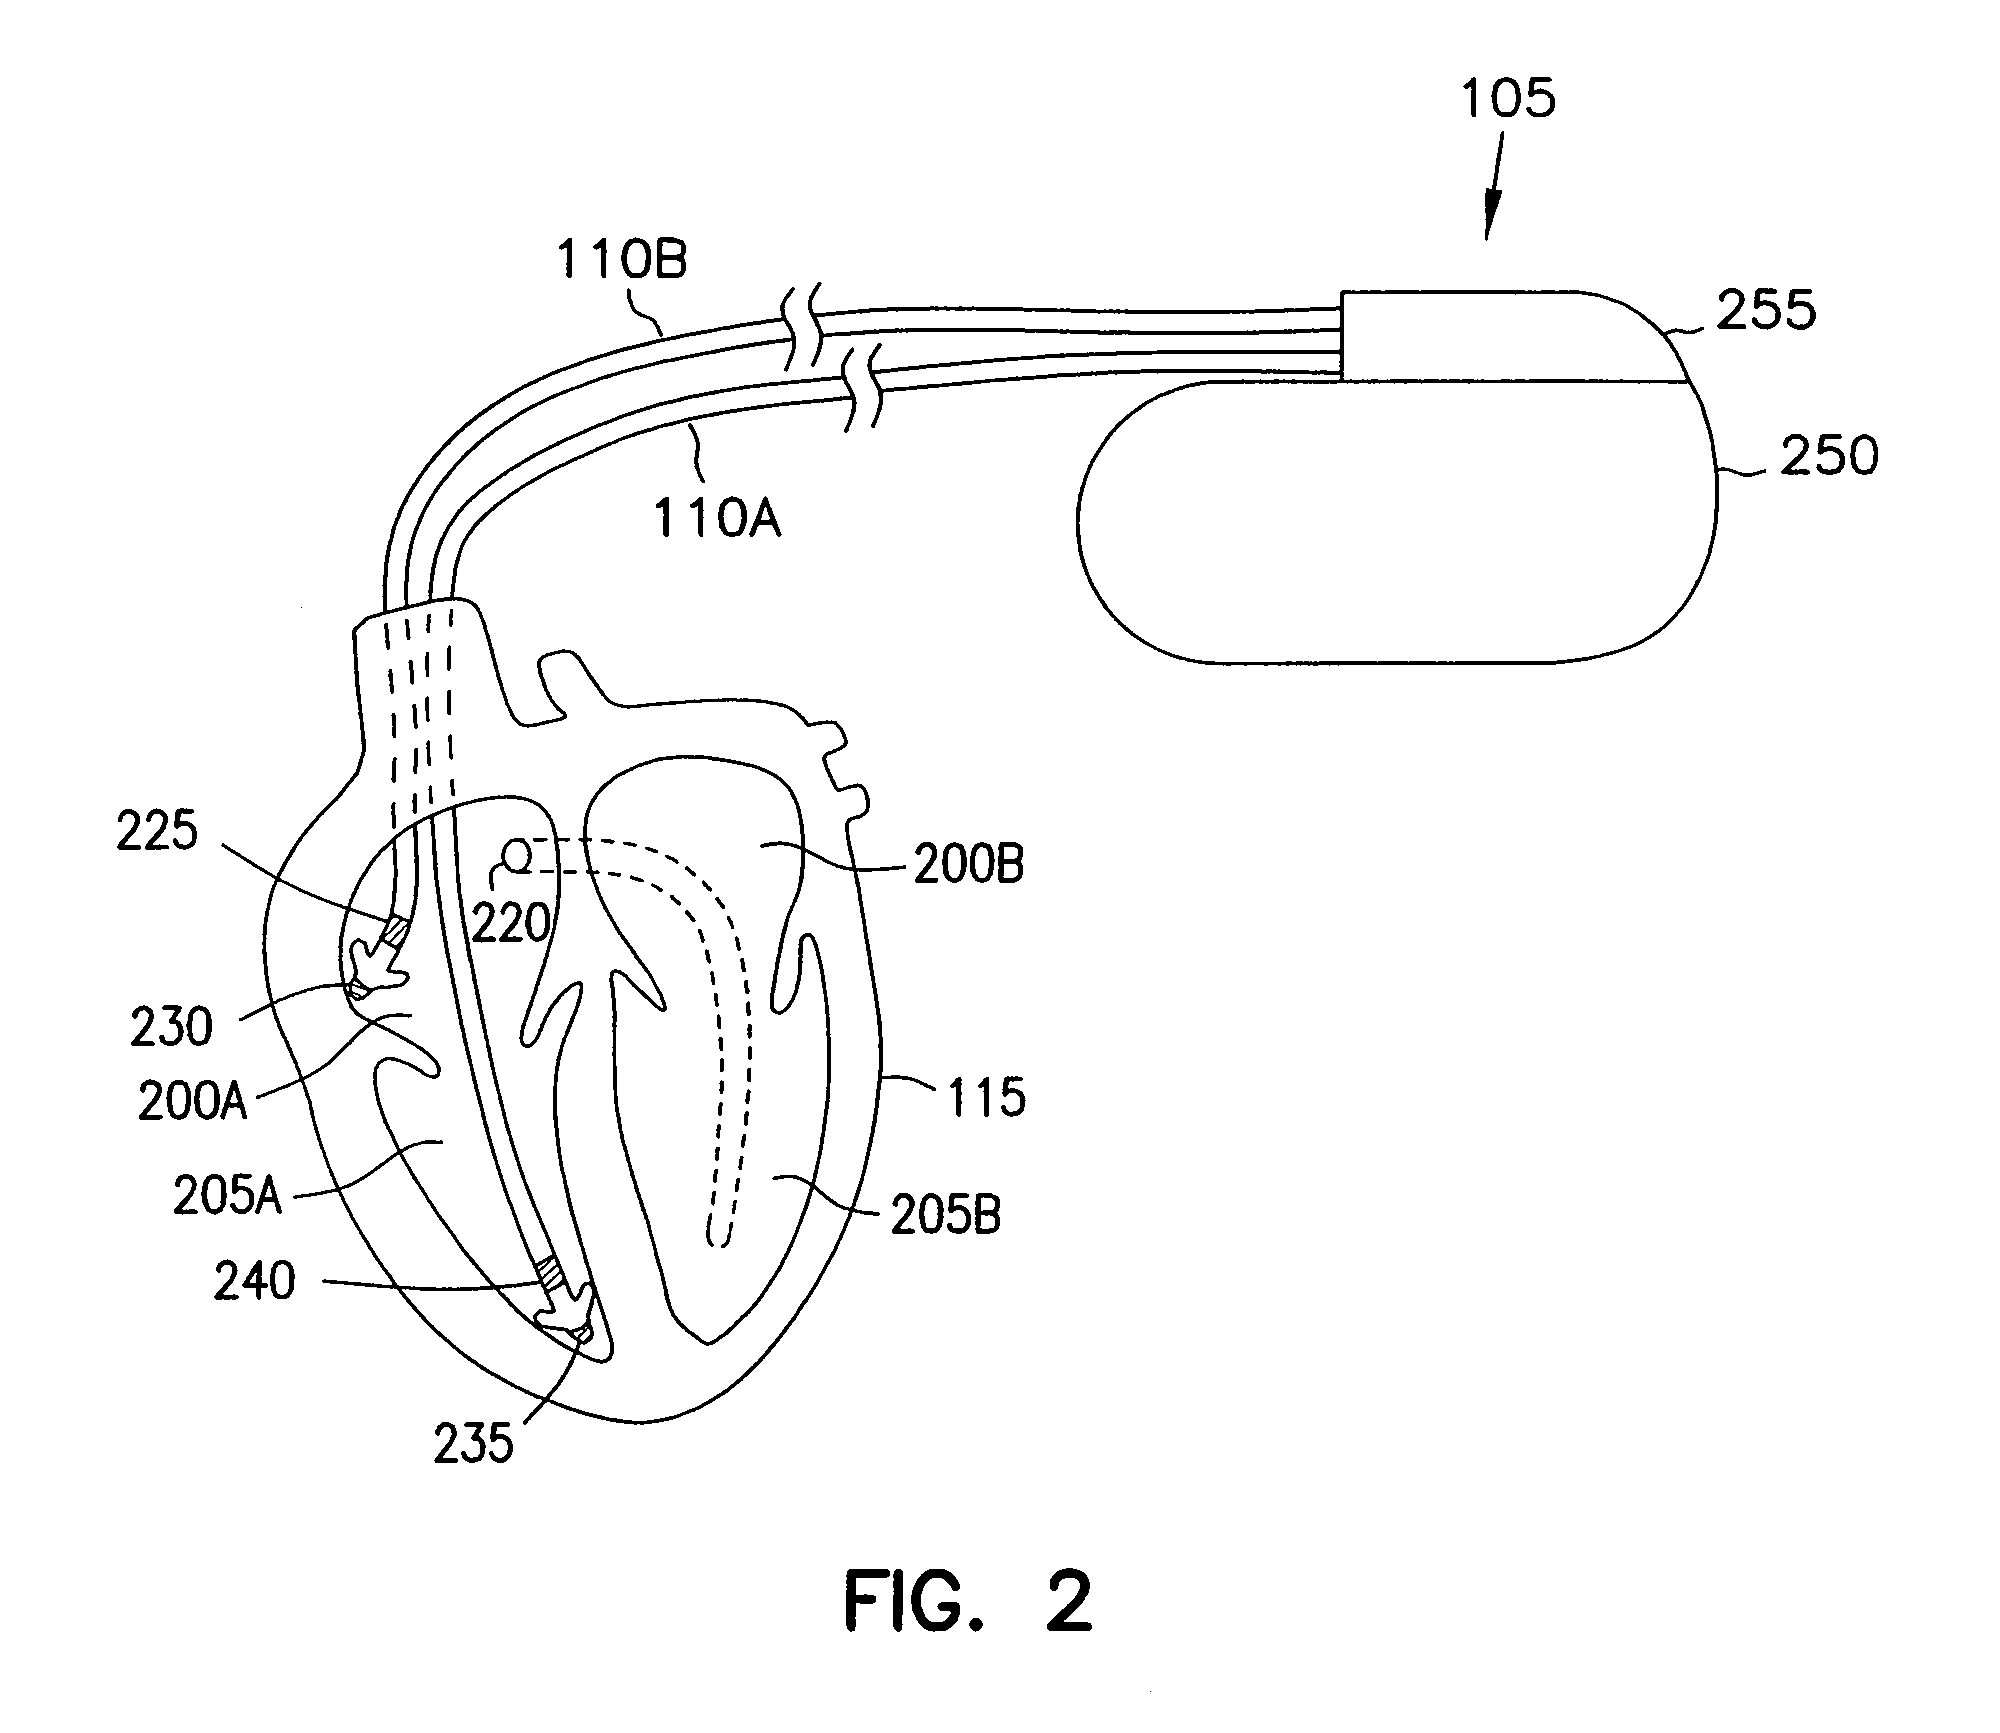 Method and apparatus for treating irregular ventricular contractions such as during atrial arrhythmia